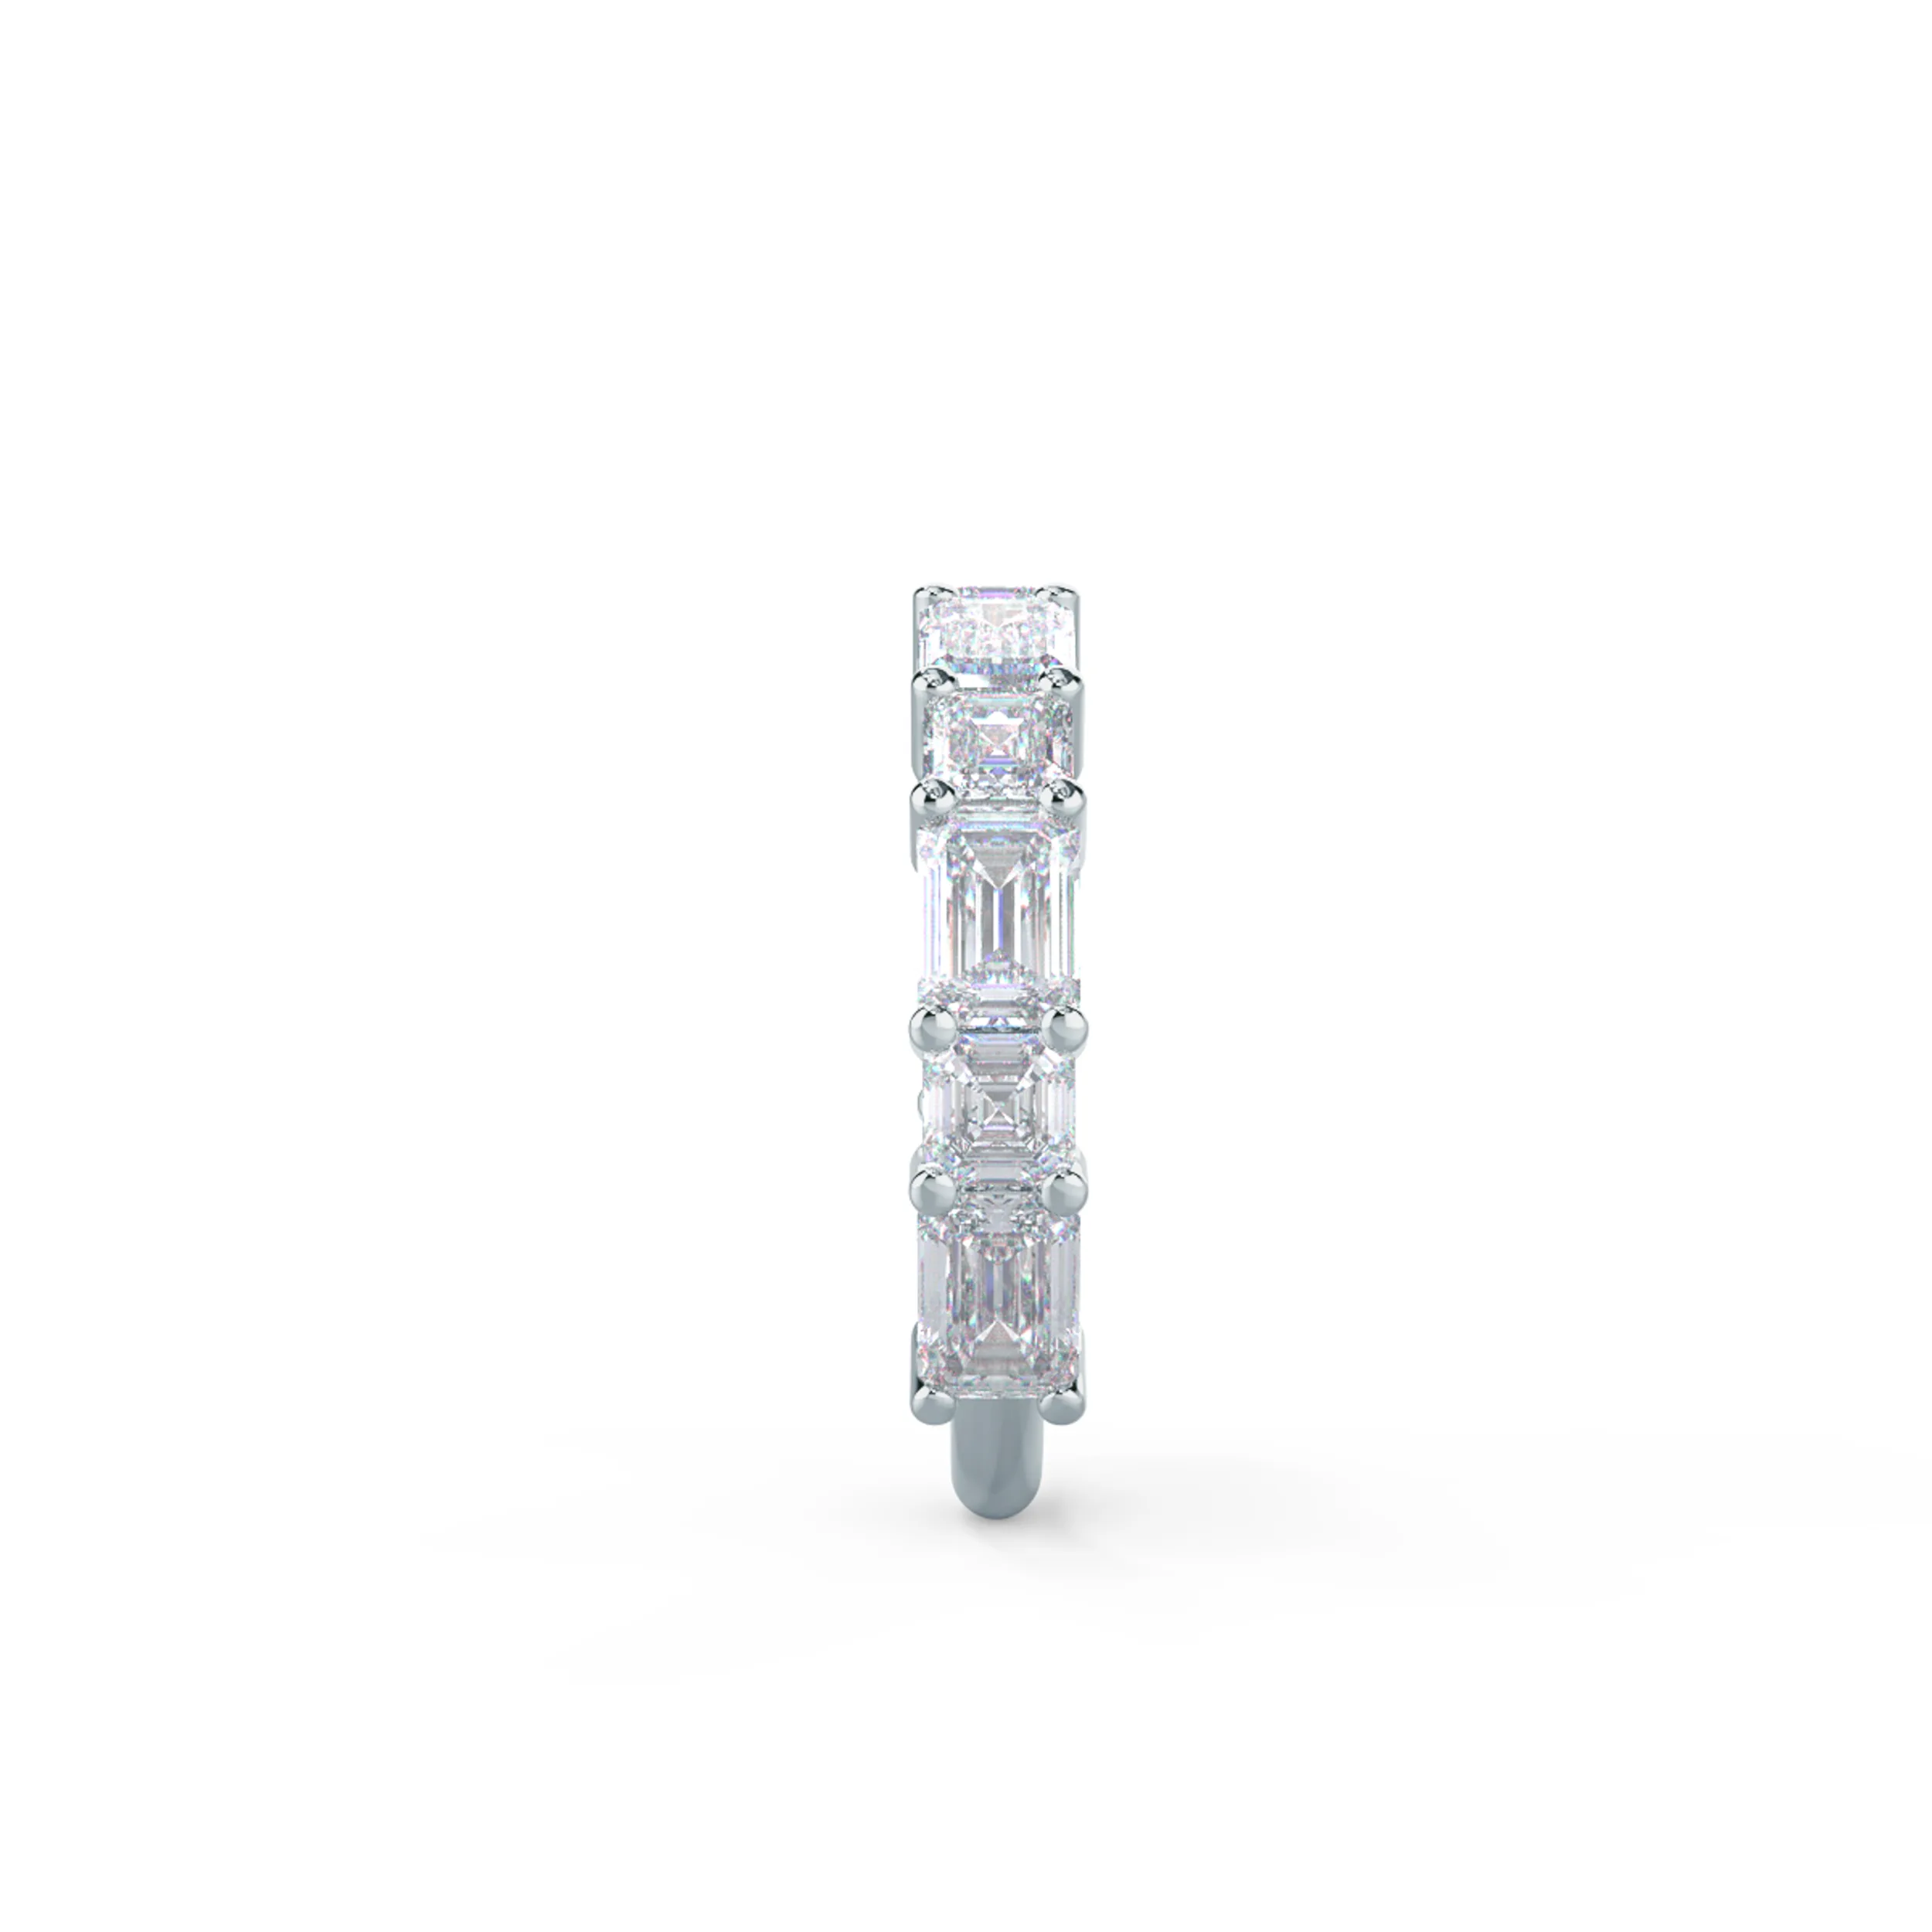 High Quality 3.4 Carat Diamonds set in 18k White Gold Emerald and Asscher East-West Three Quarter Band (Side View)